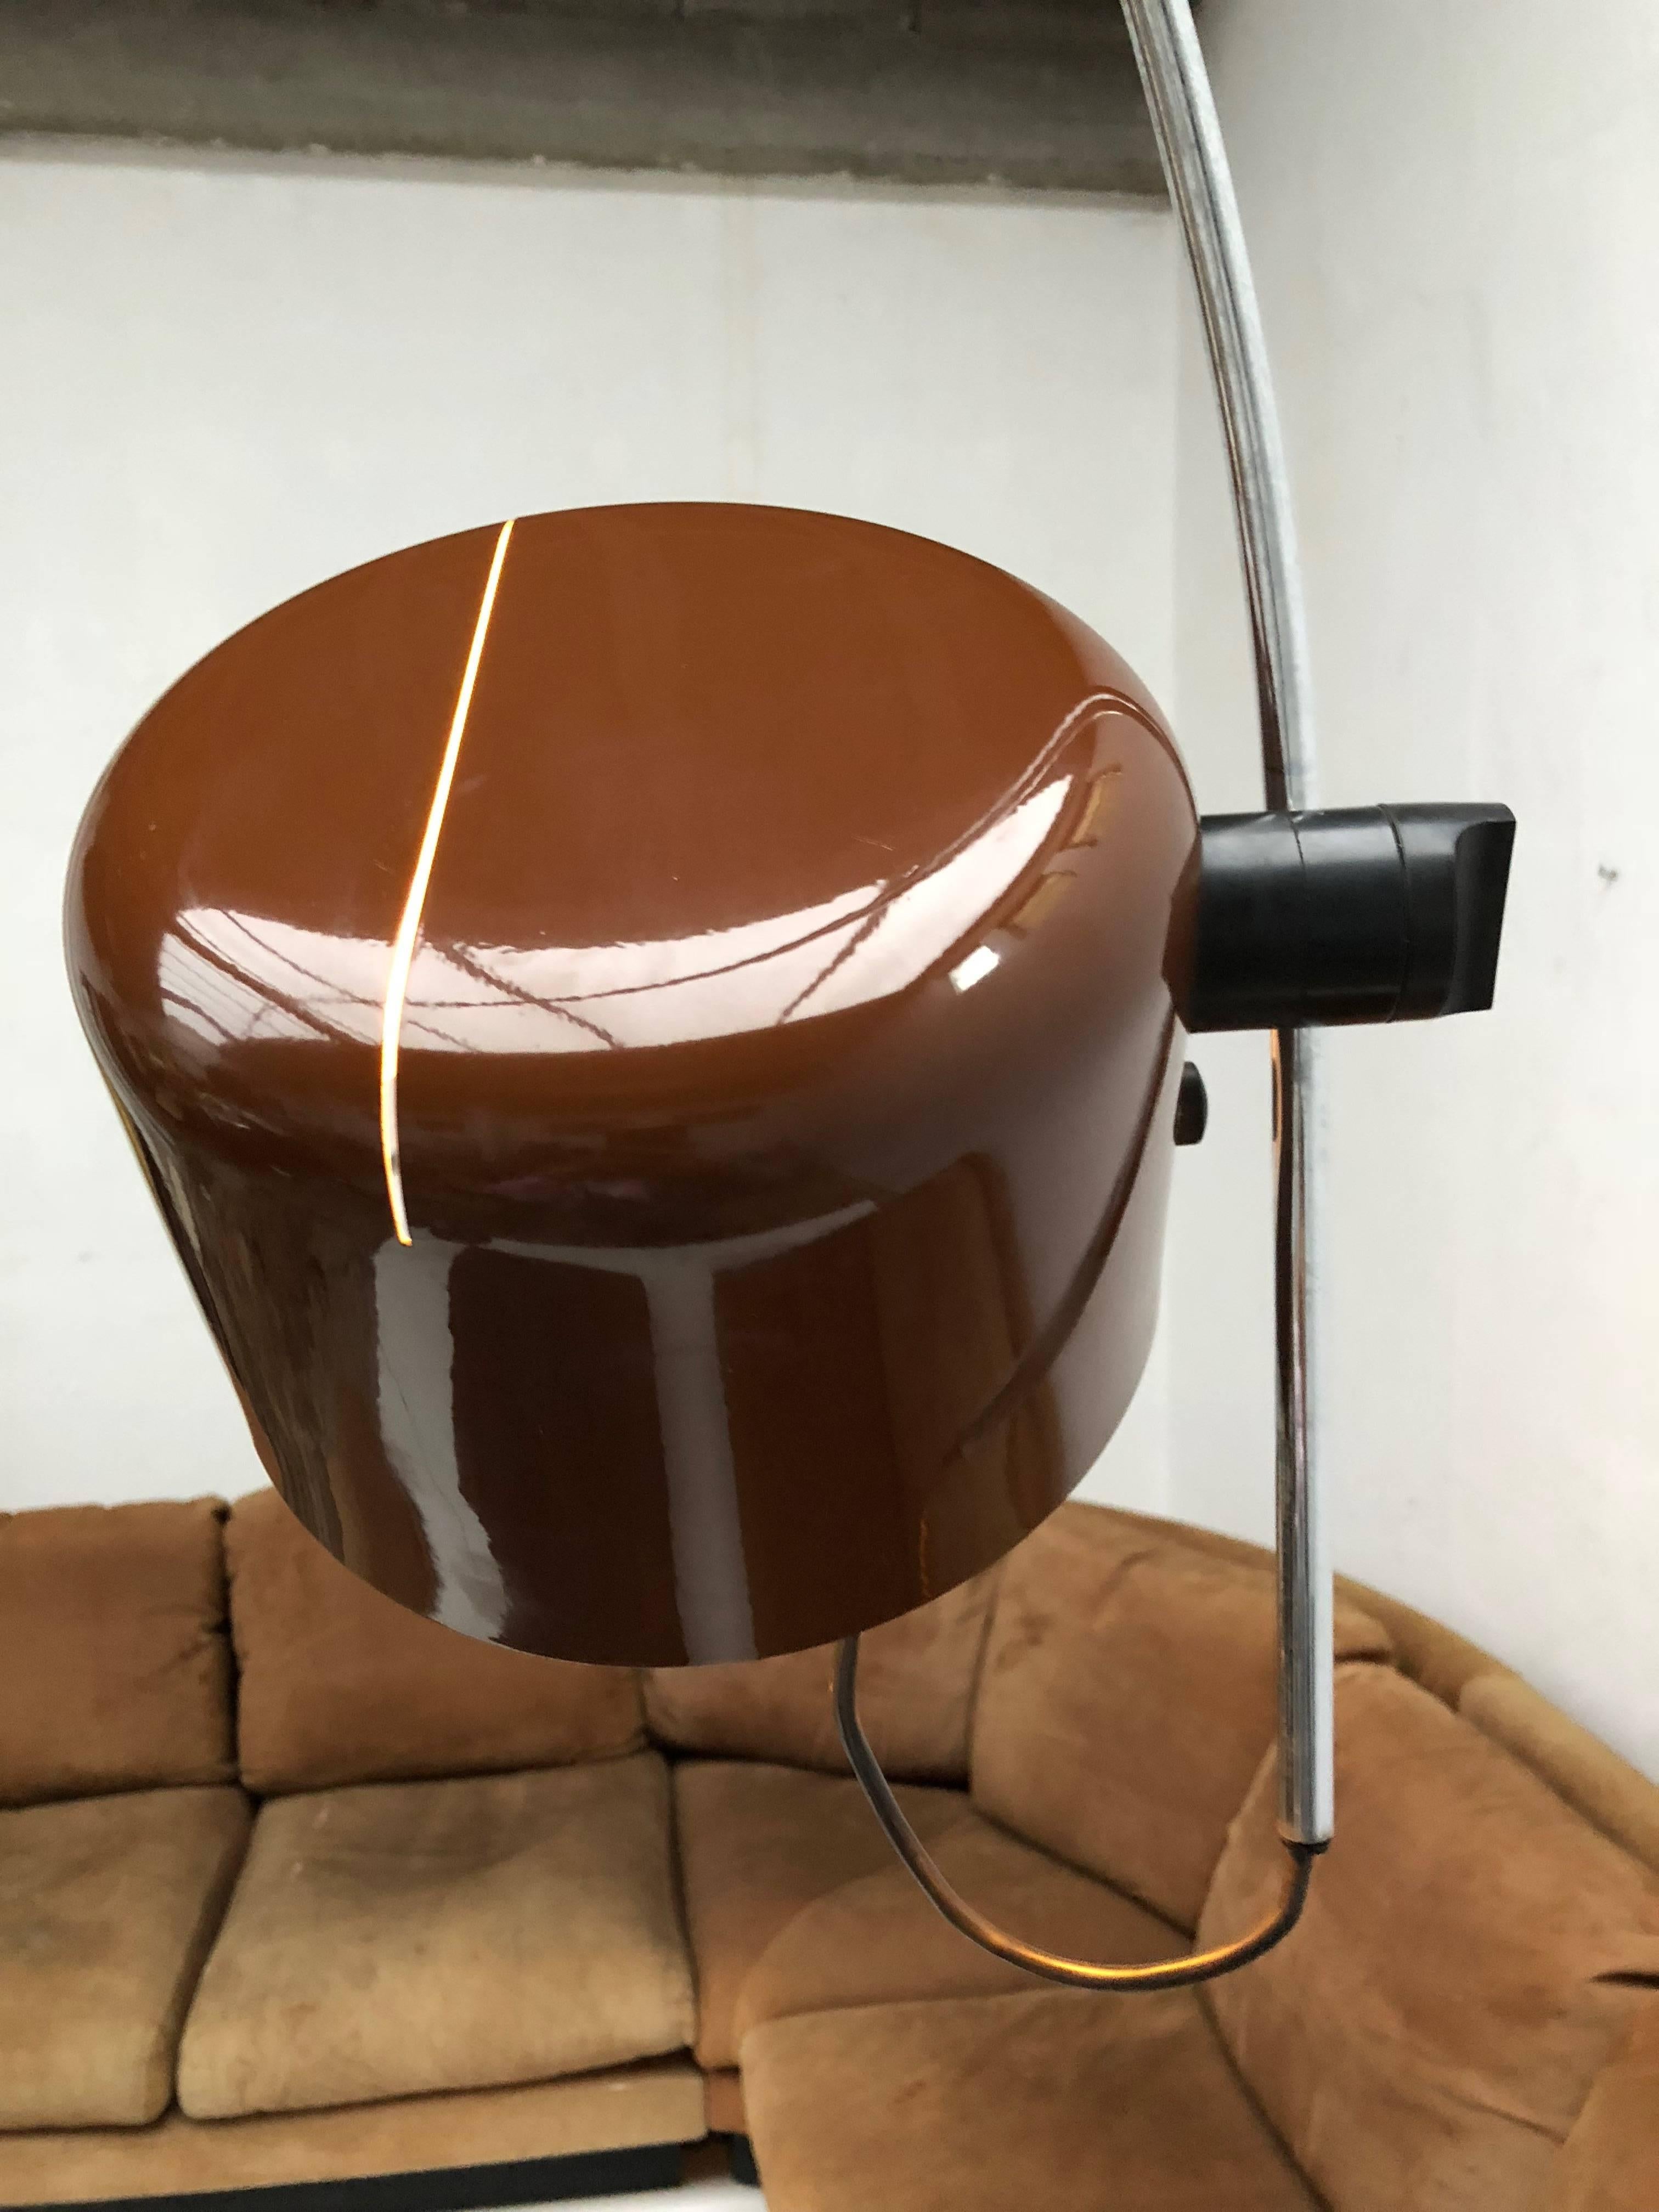 Adjustable, arched "Coupe" floor lamp with aluminium reflector, chrome armature, and lacquered metal base
Design by Joe Colombo and produced by O-Luce, circa 1970
A sophisticated design that is complex to manufacture, the lamp features a